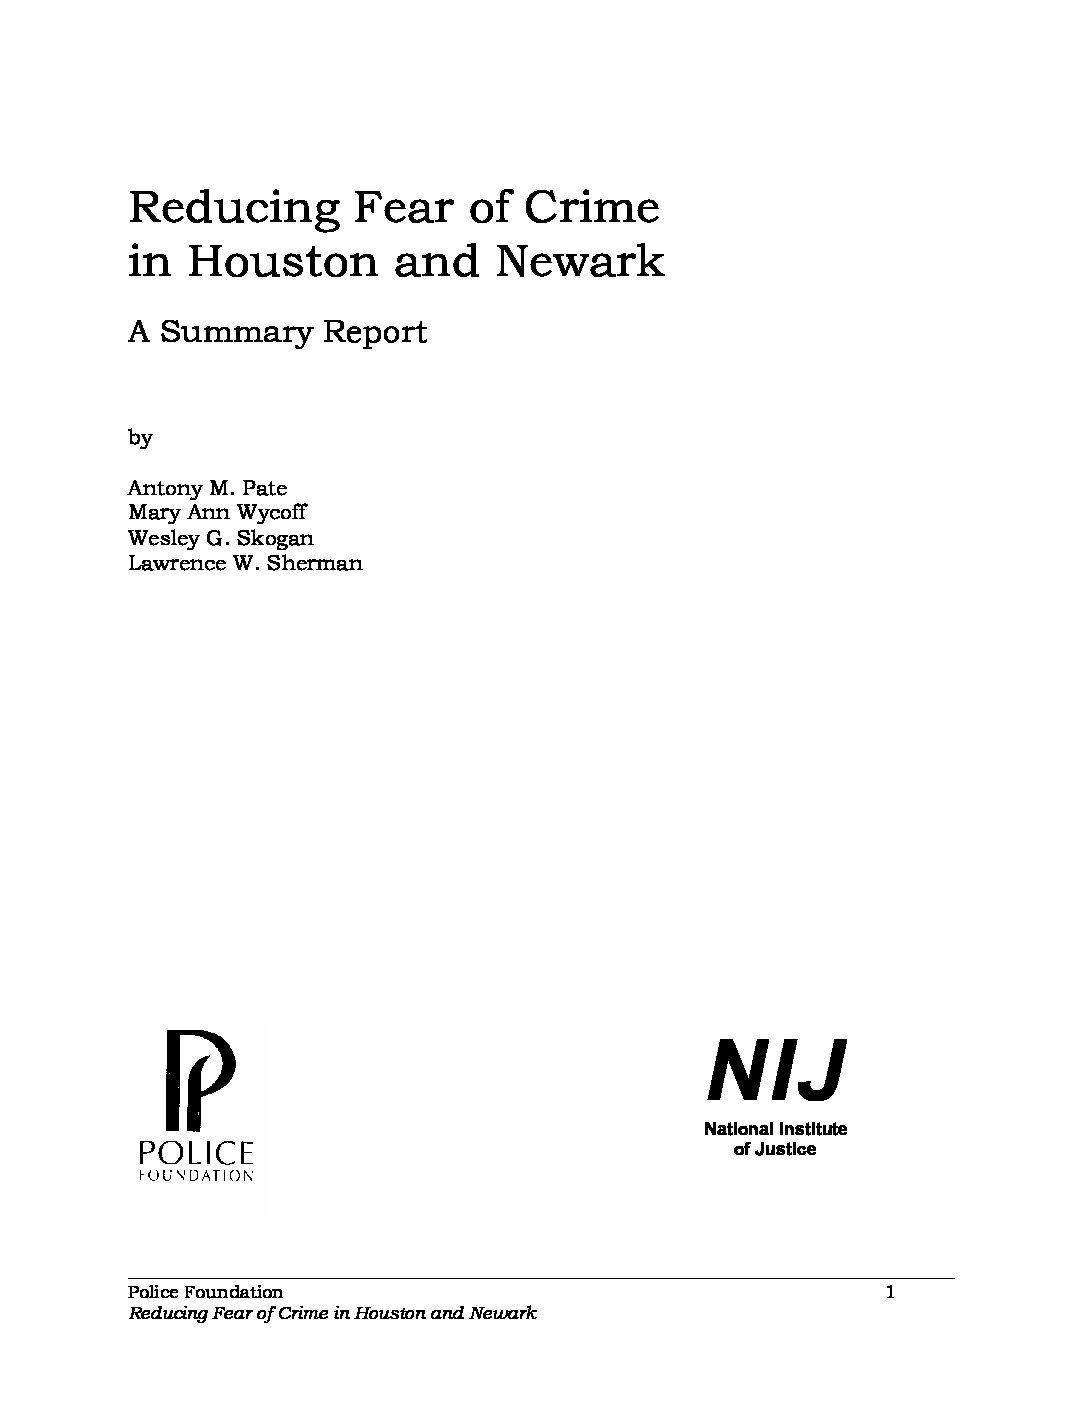 Reducing Fear of Crime report cover